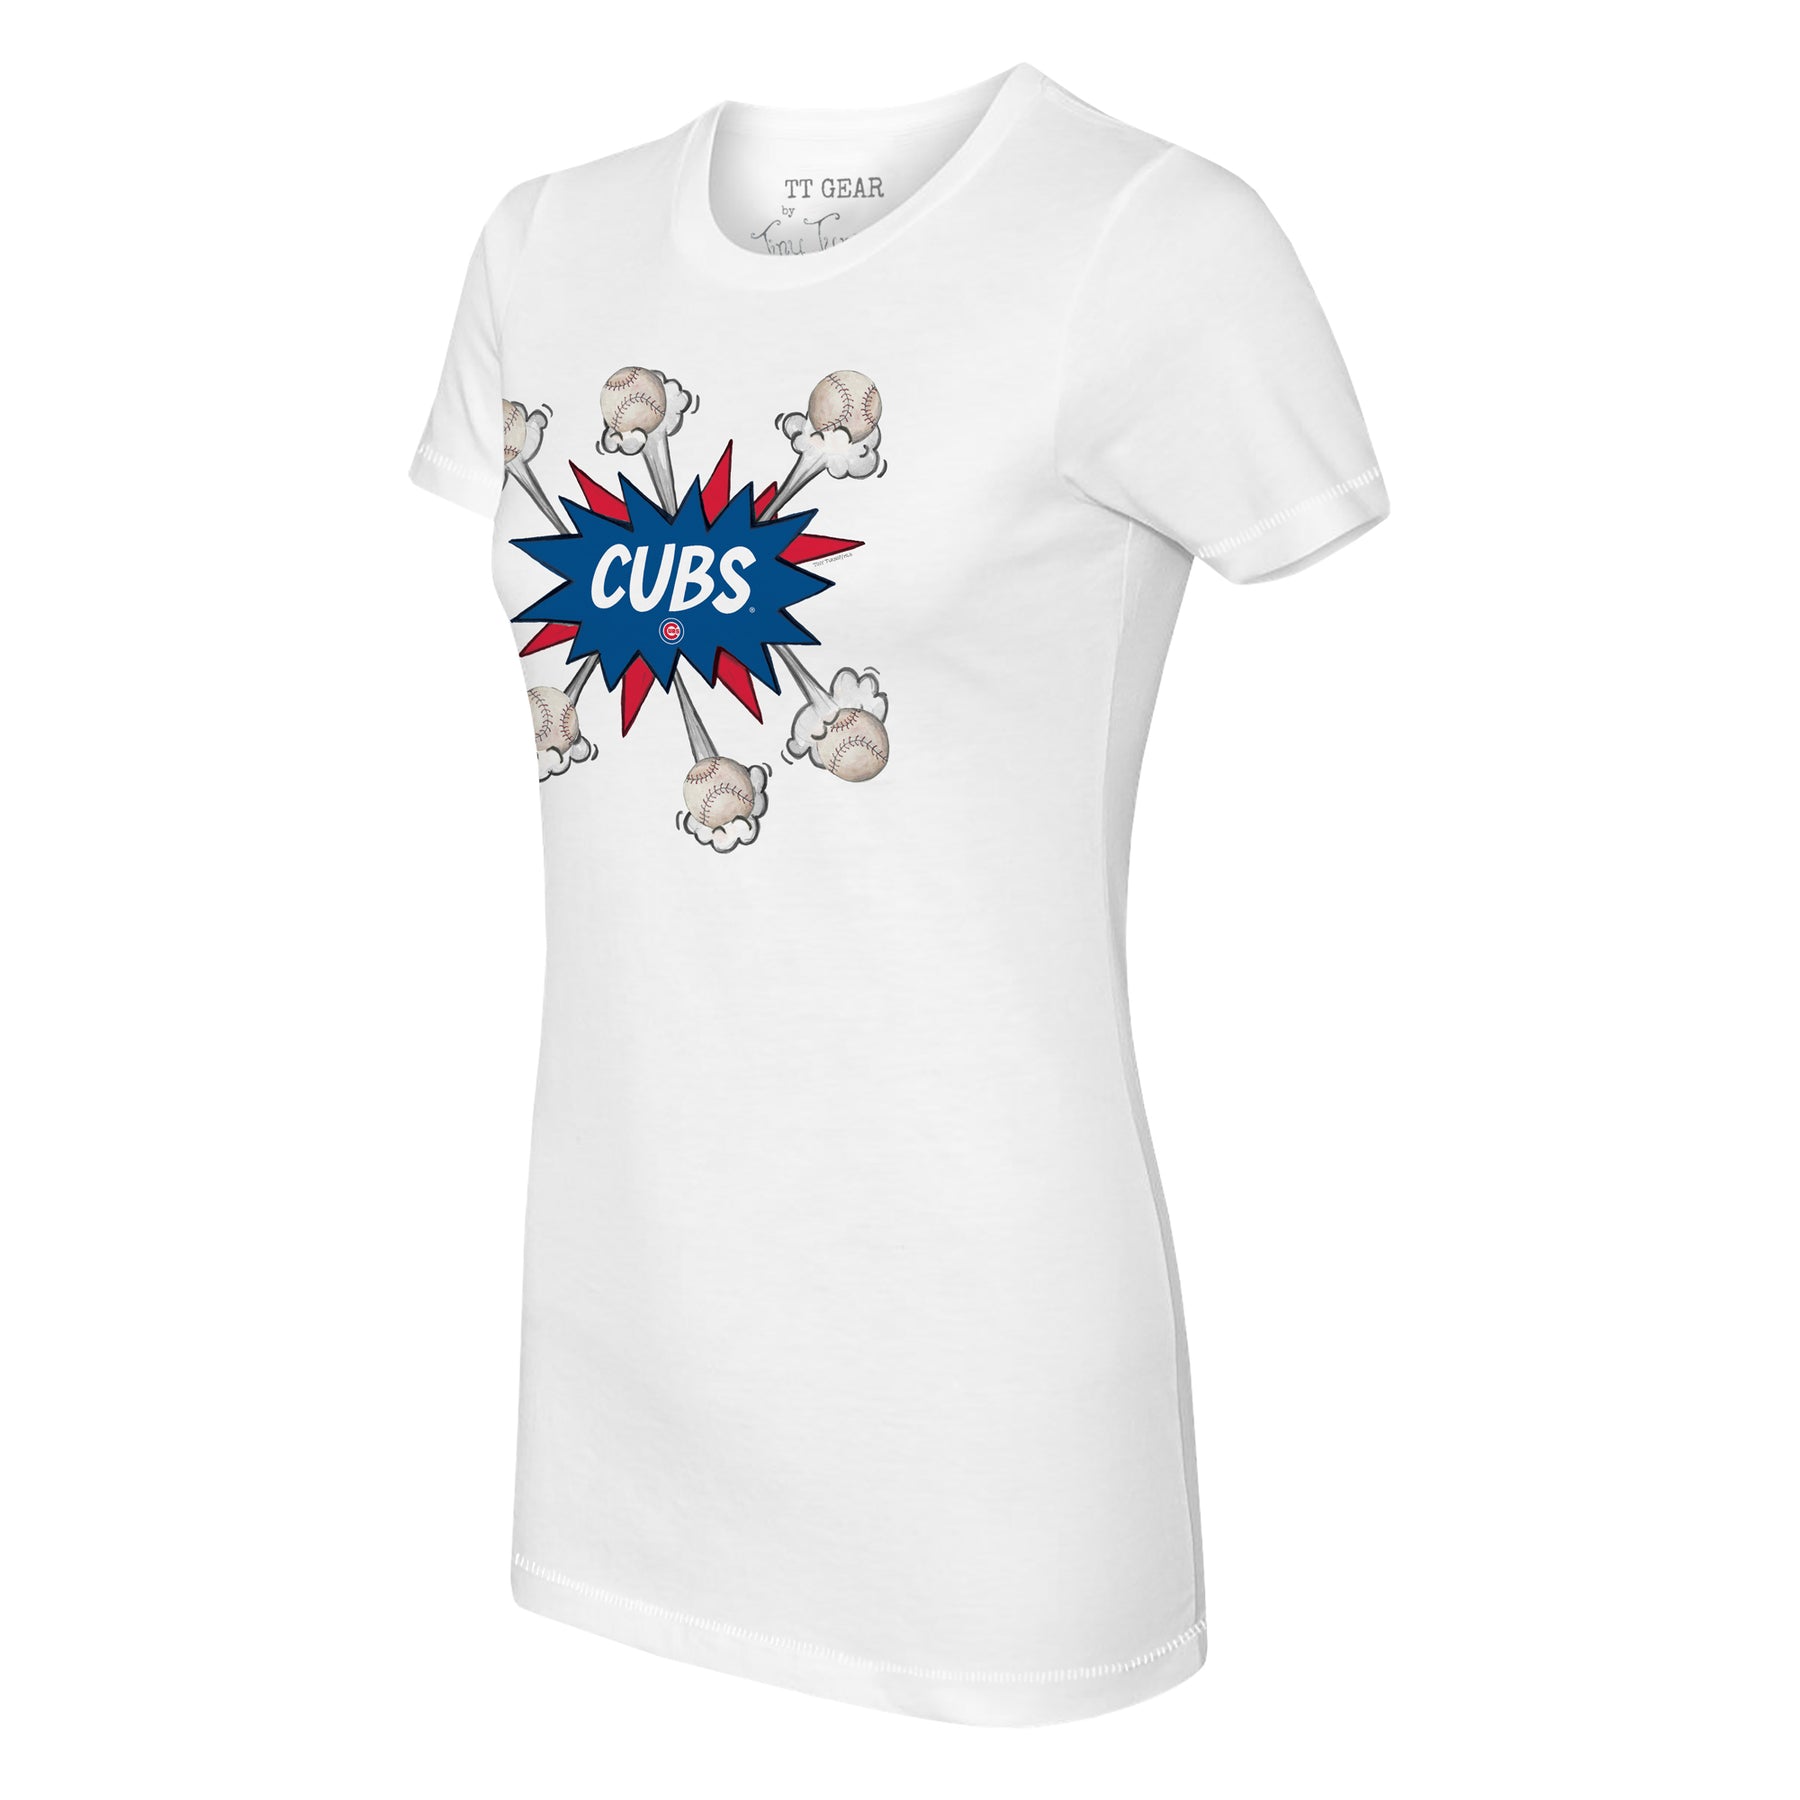 Cheap Chicago Cubs Apparel, Discount Cubs Gear, MLB Cubs Merchandise On Sale